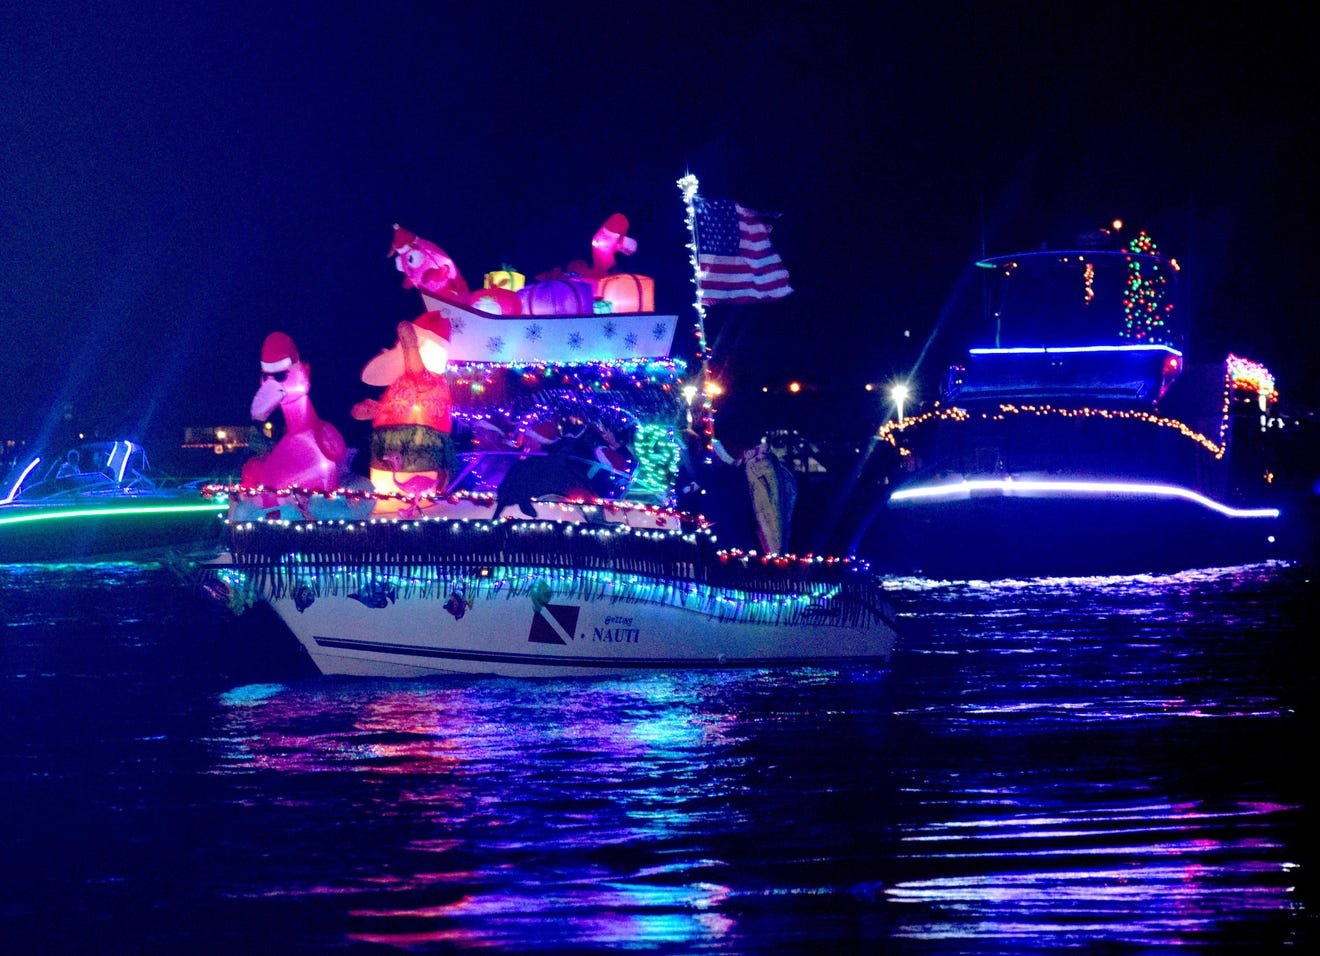 Holiday on the Harbor Boat Parade is set Dec. 13 on Destin harbor